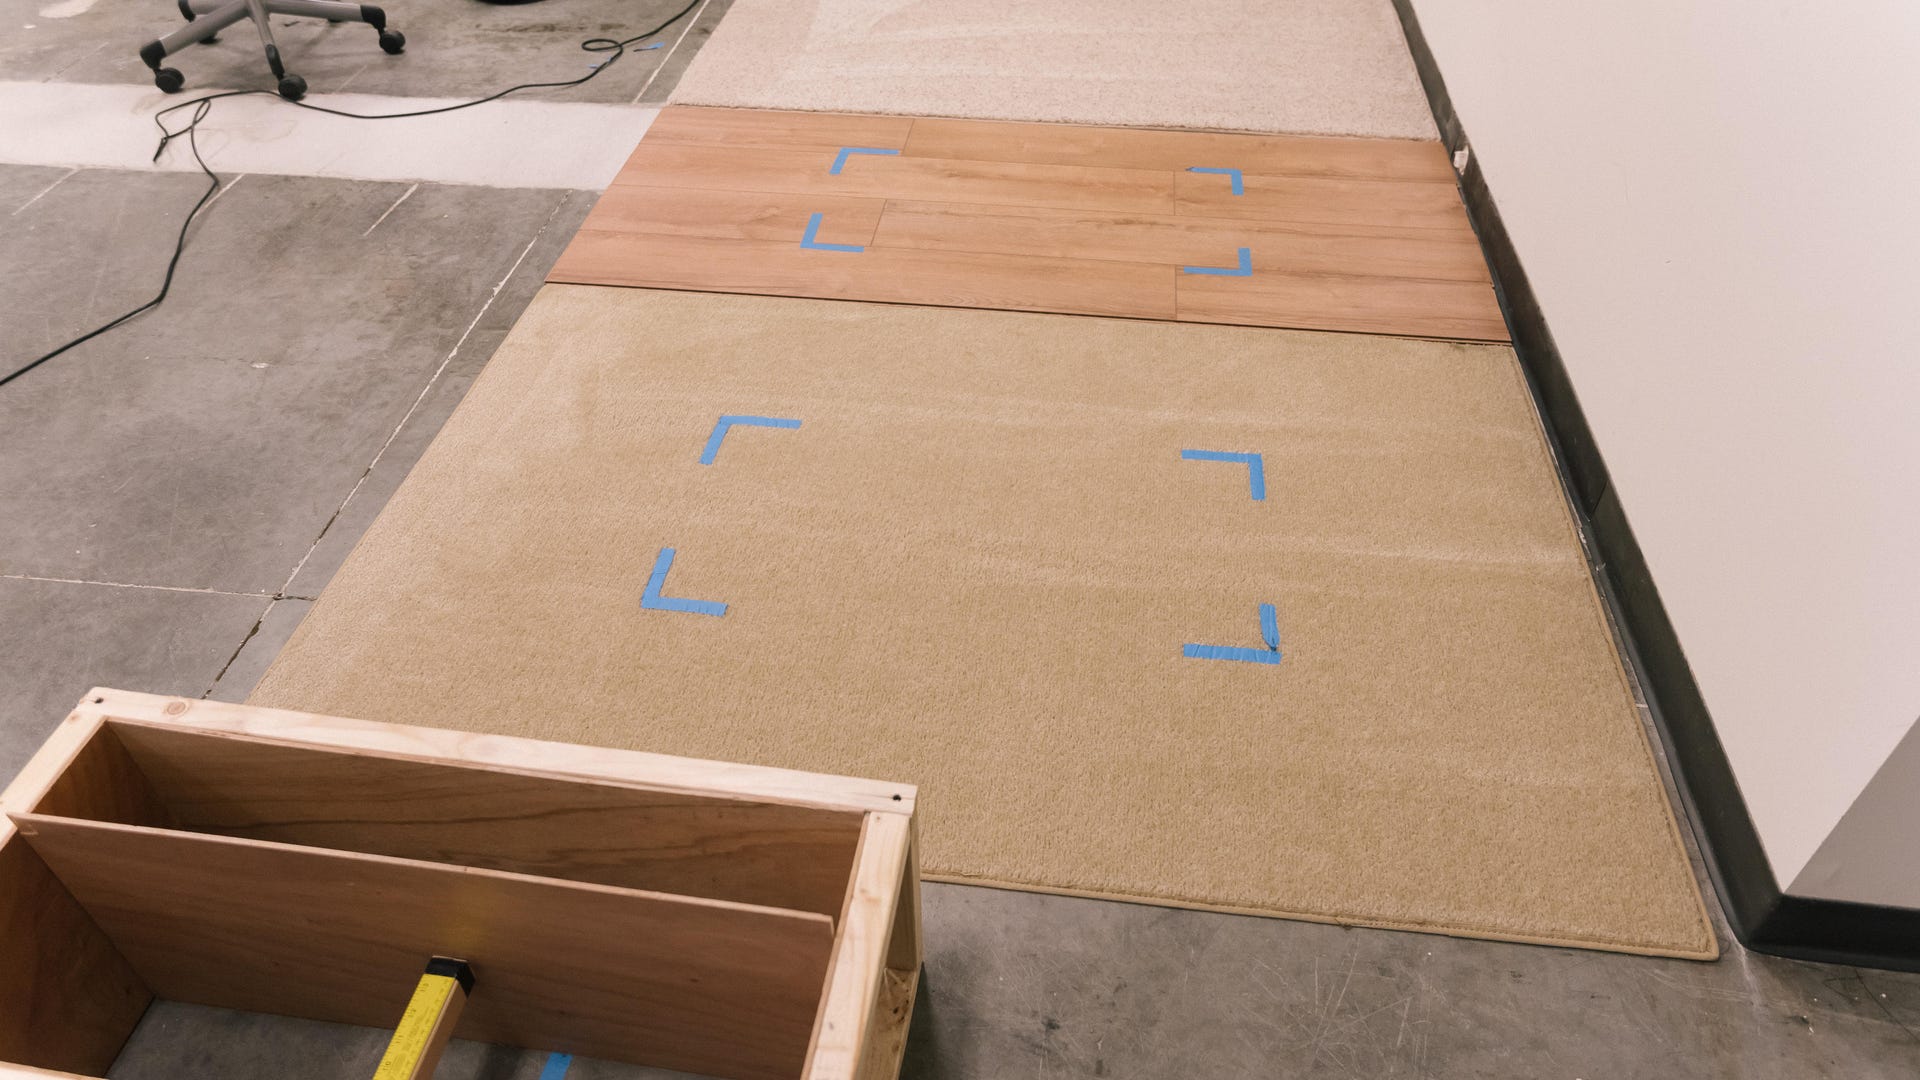 Three flooring surfaces used in the vacuum tests.